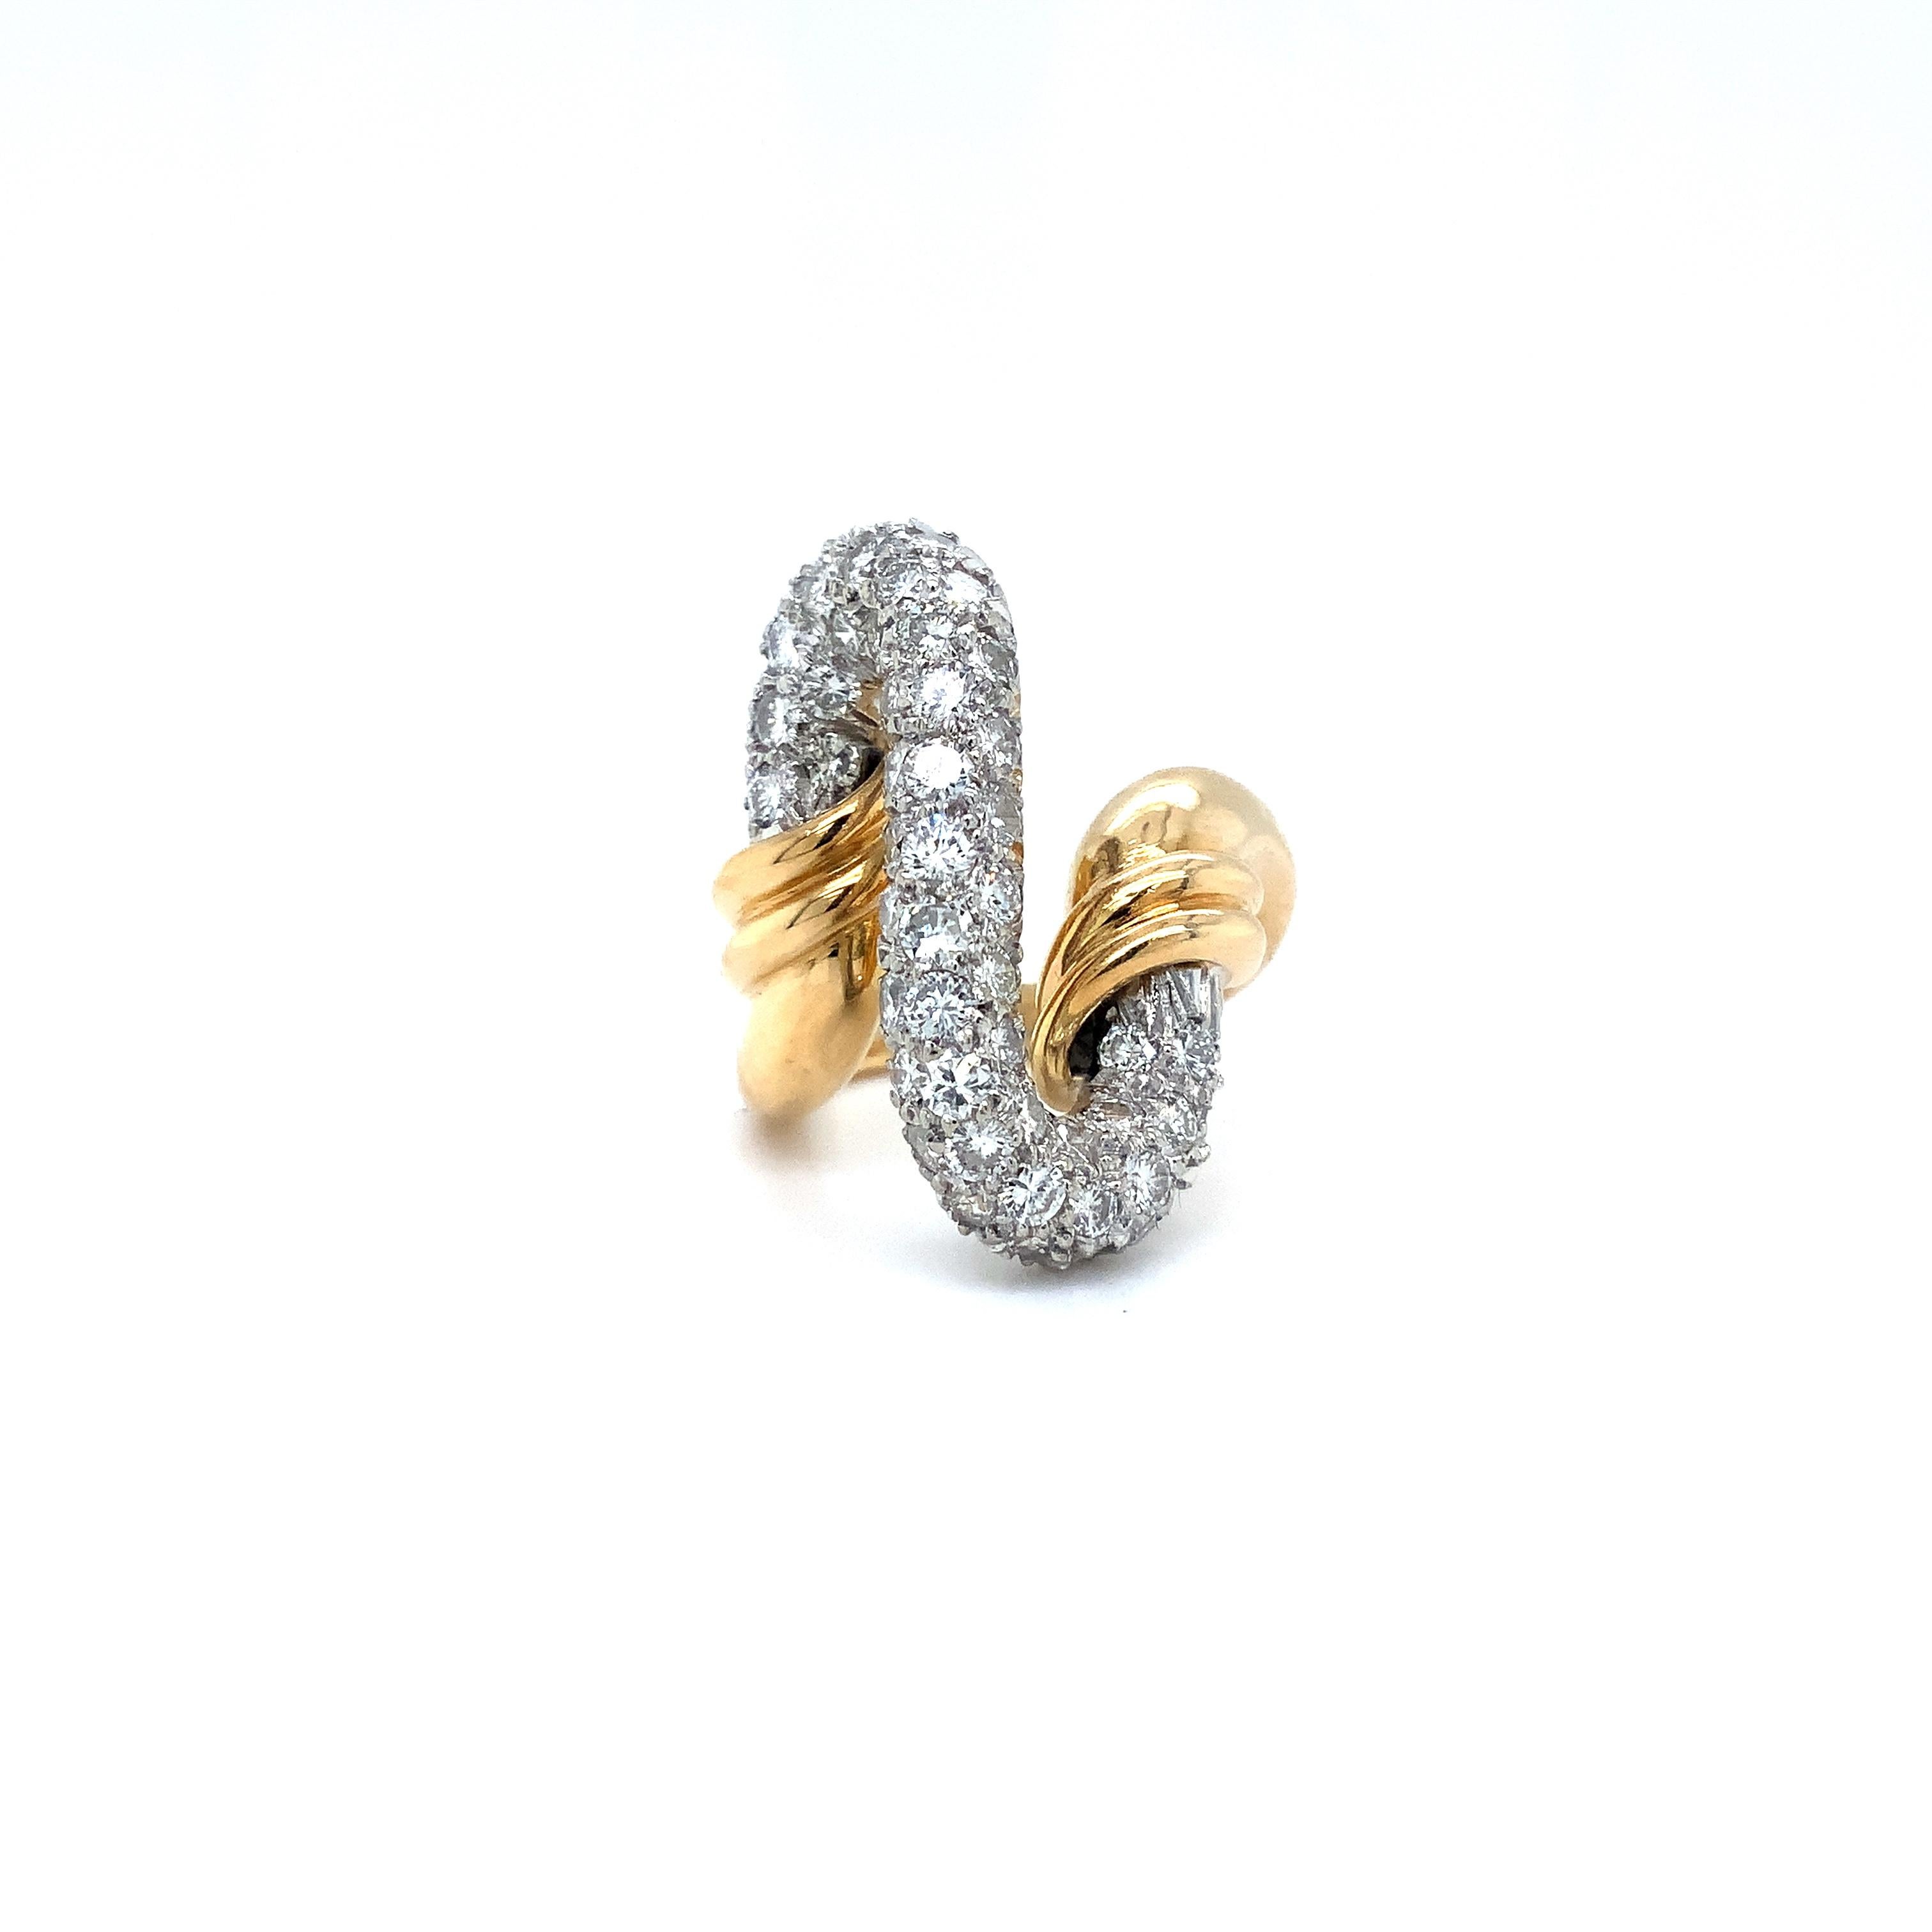  This Vintage Pave Diamond Ring is Formed in 18 kt Yellow and White Gold. Its Modern 